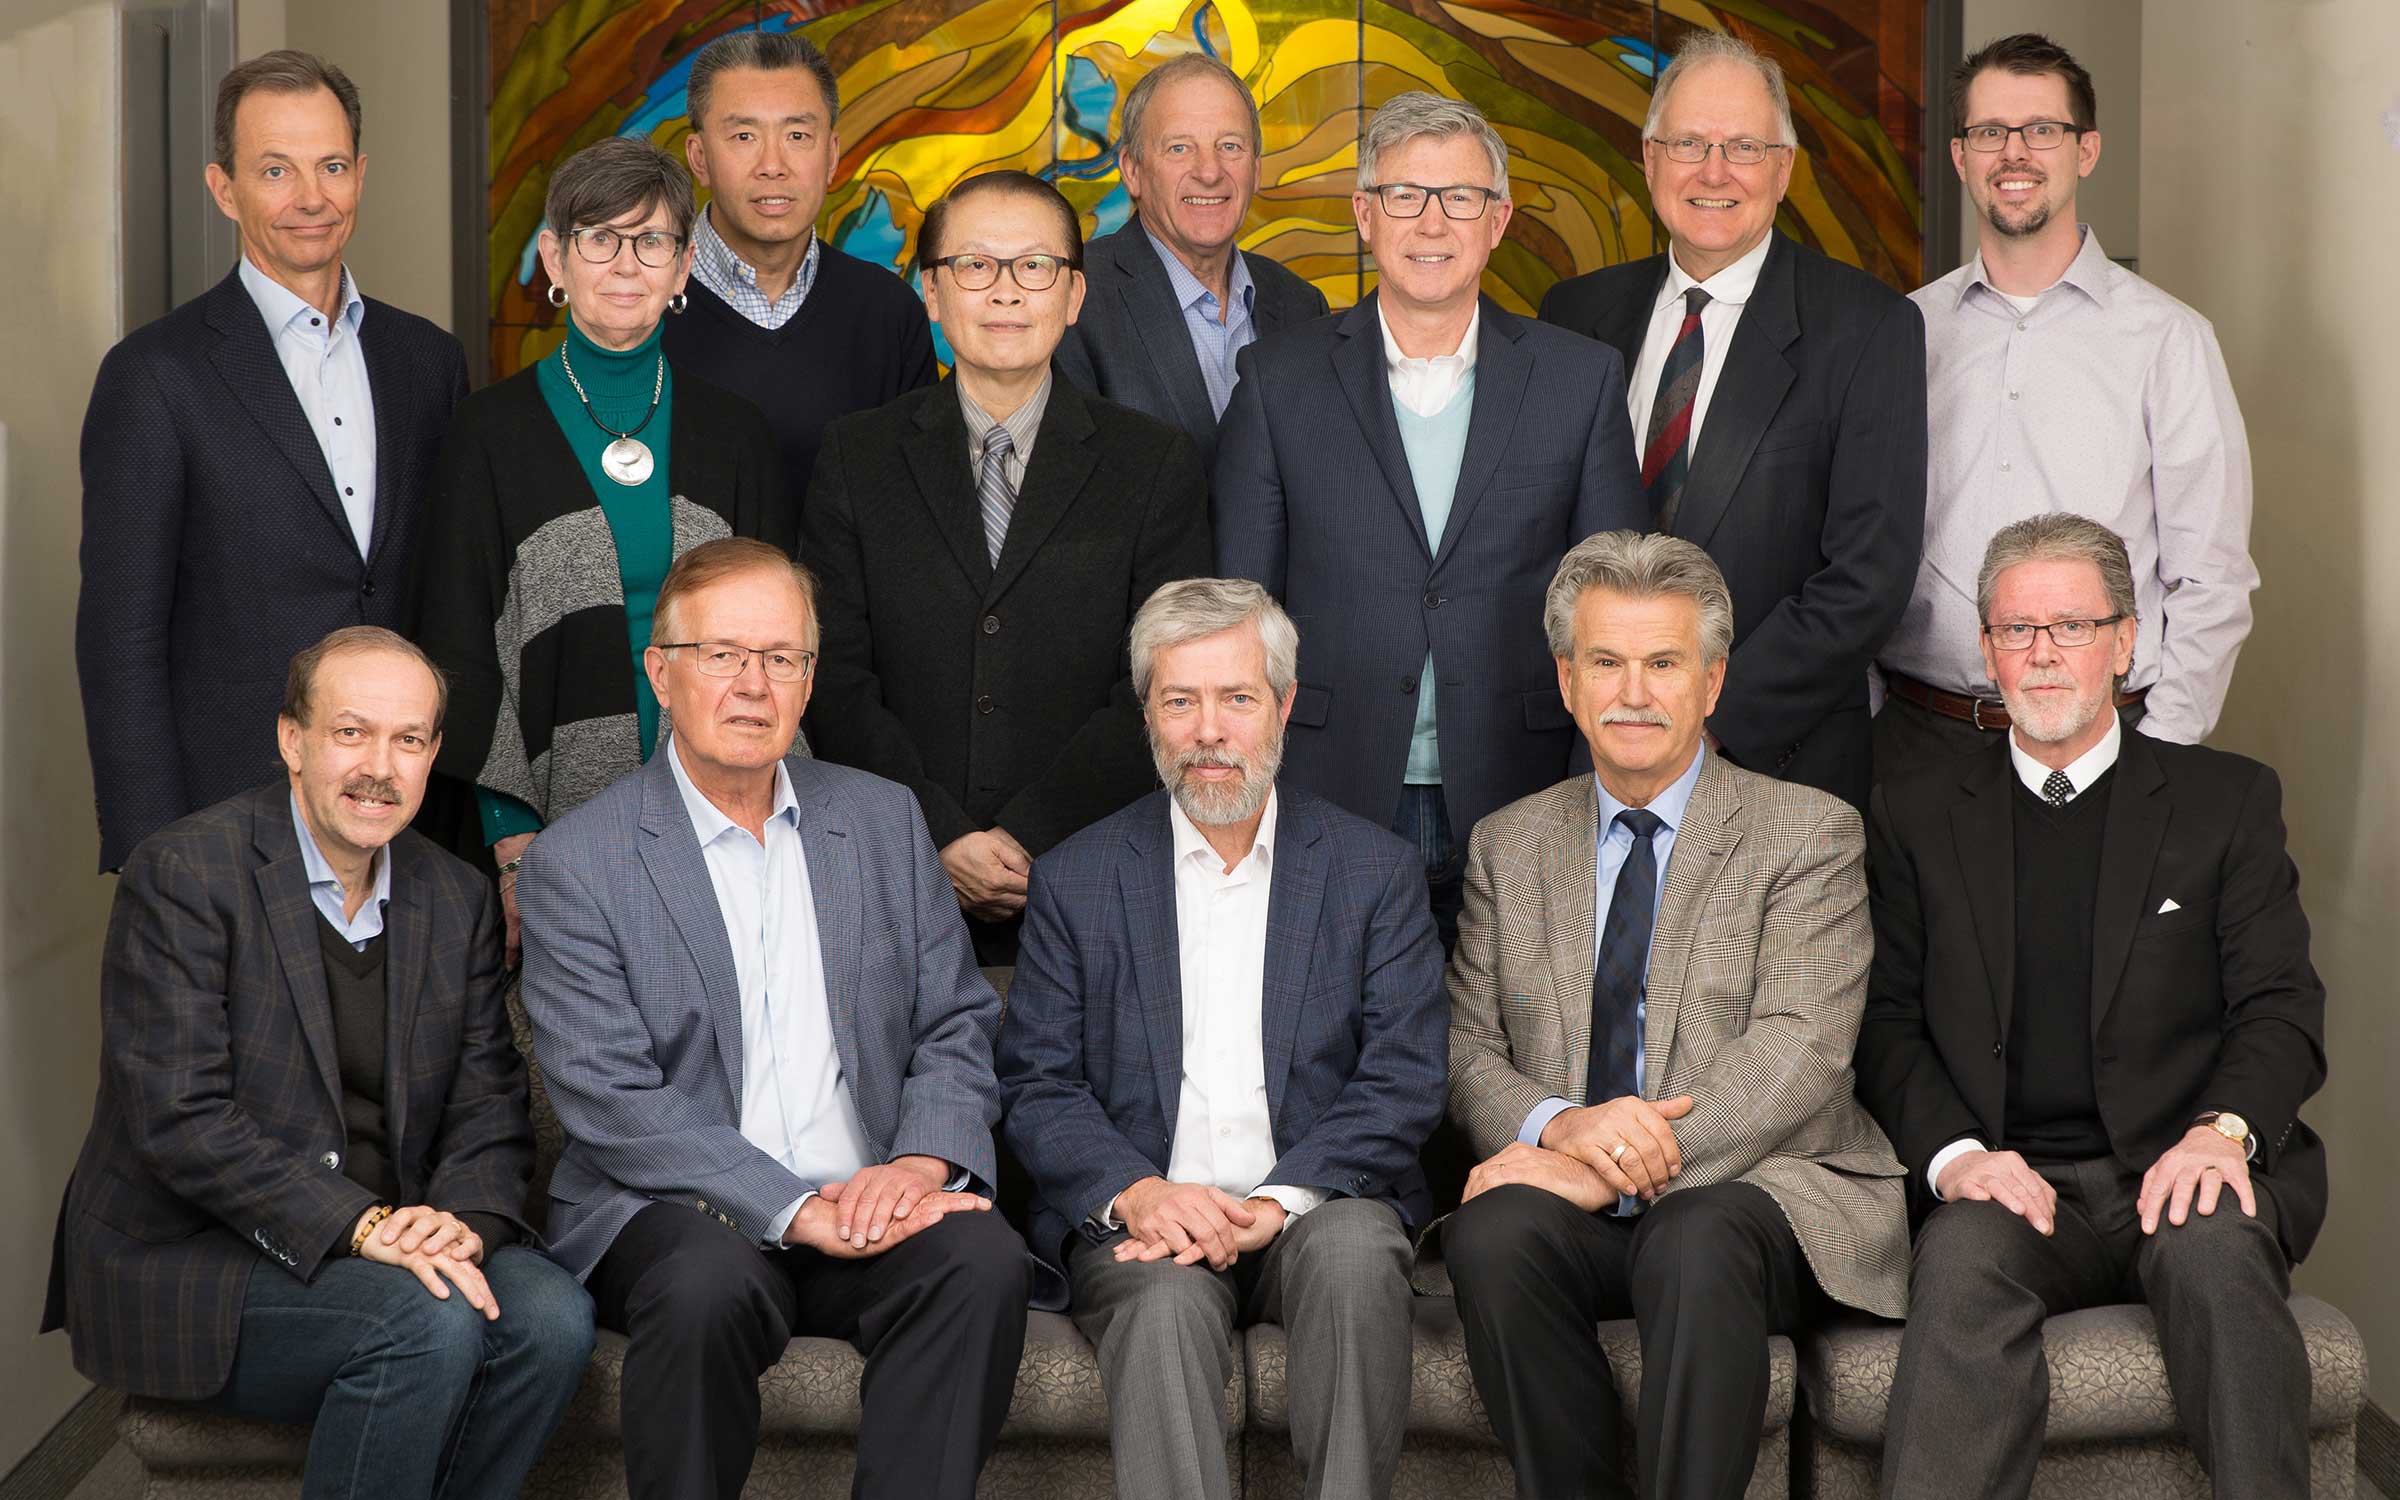 Ambrose Board of Governors 2018